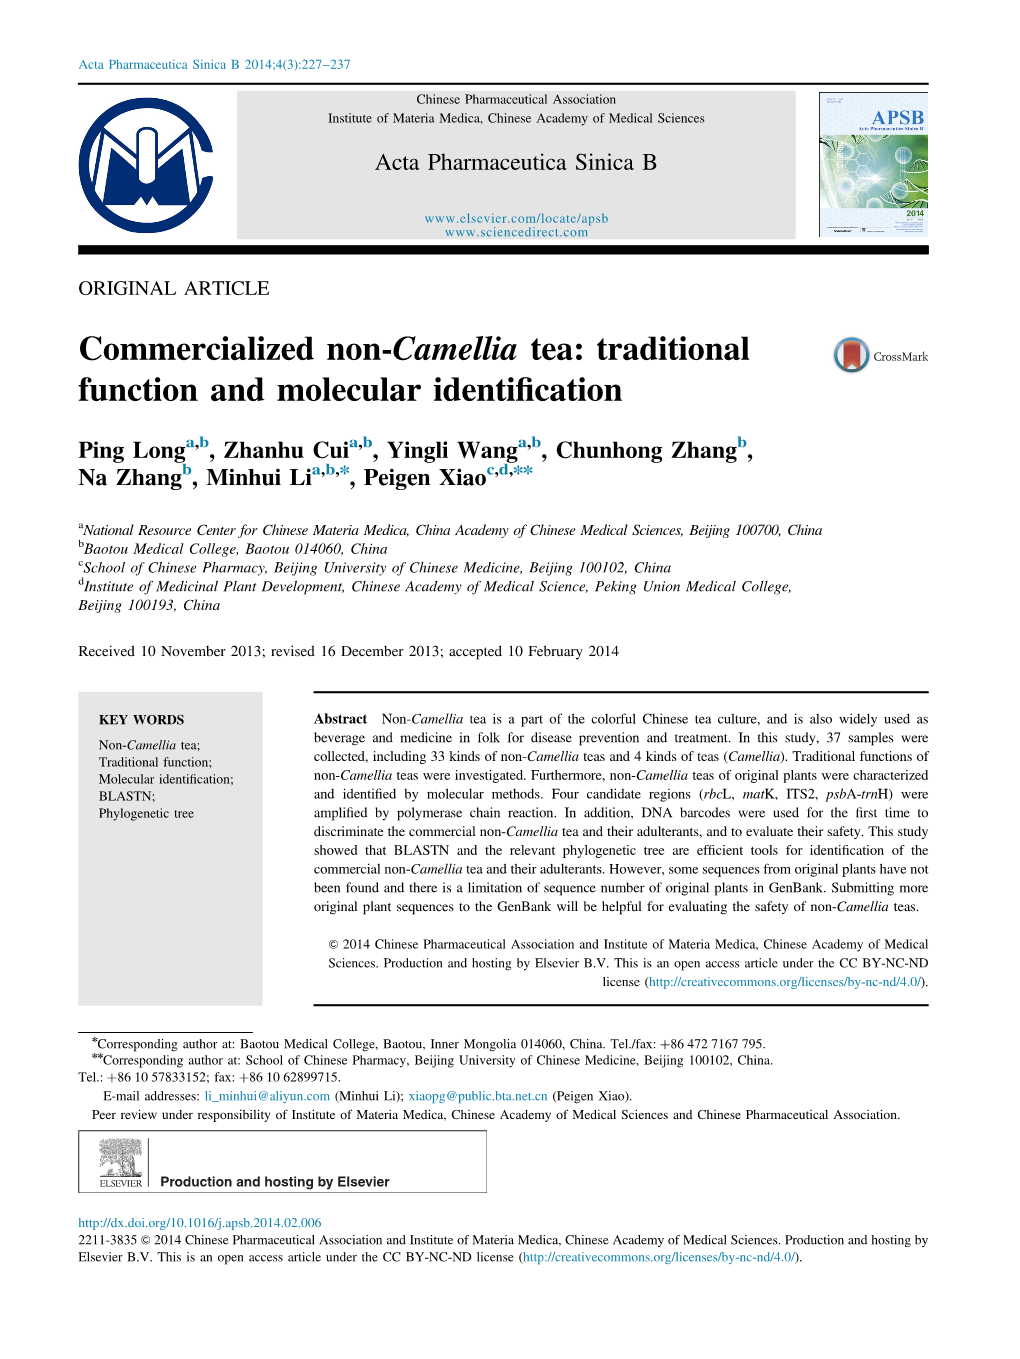 Commercialized Non-Camellia Tea Traditional Function And